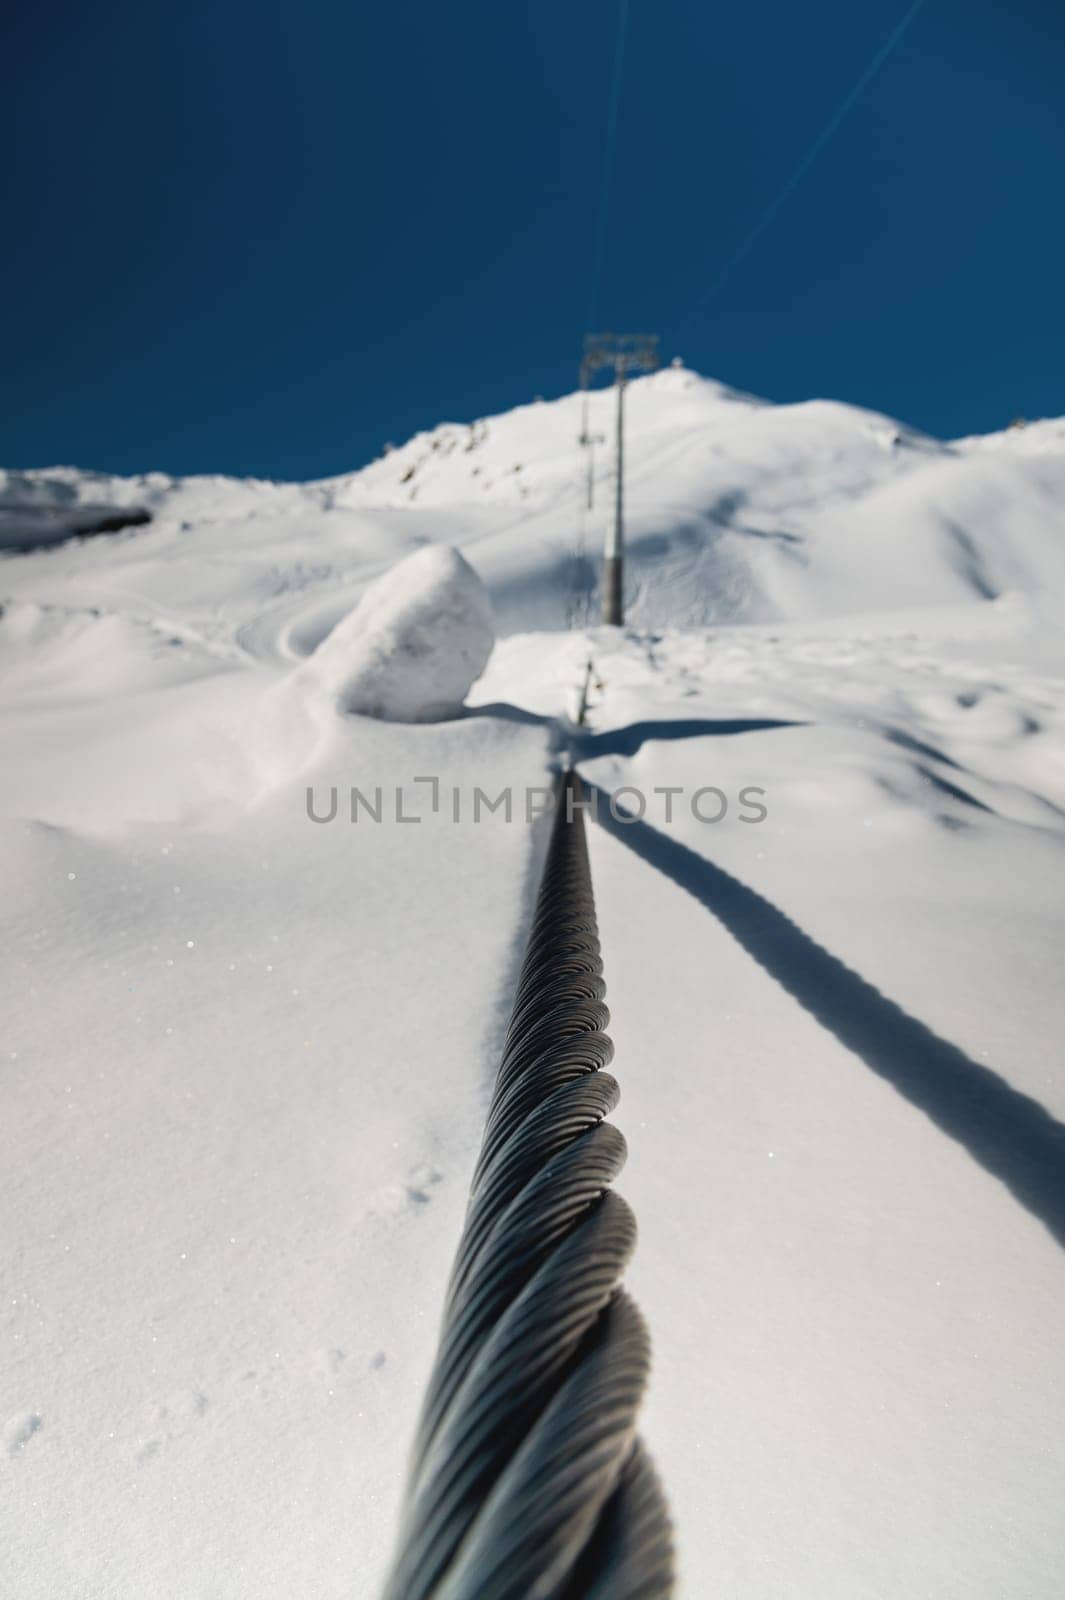 Steel cable of a cable car close-up. Rope texture. The path of the cable cabin against the backdrop of snow-capped mountains by yanik88